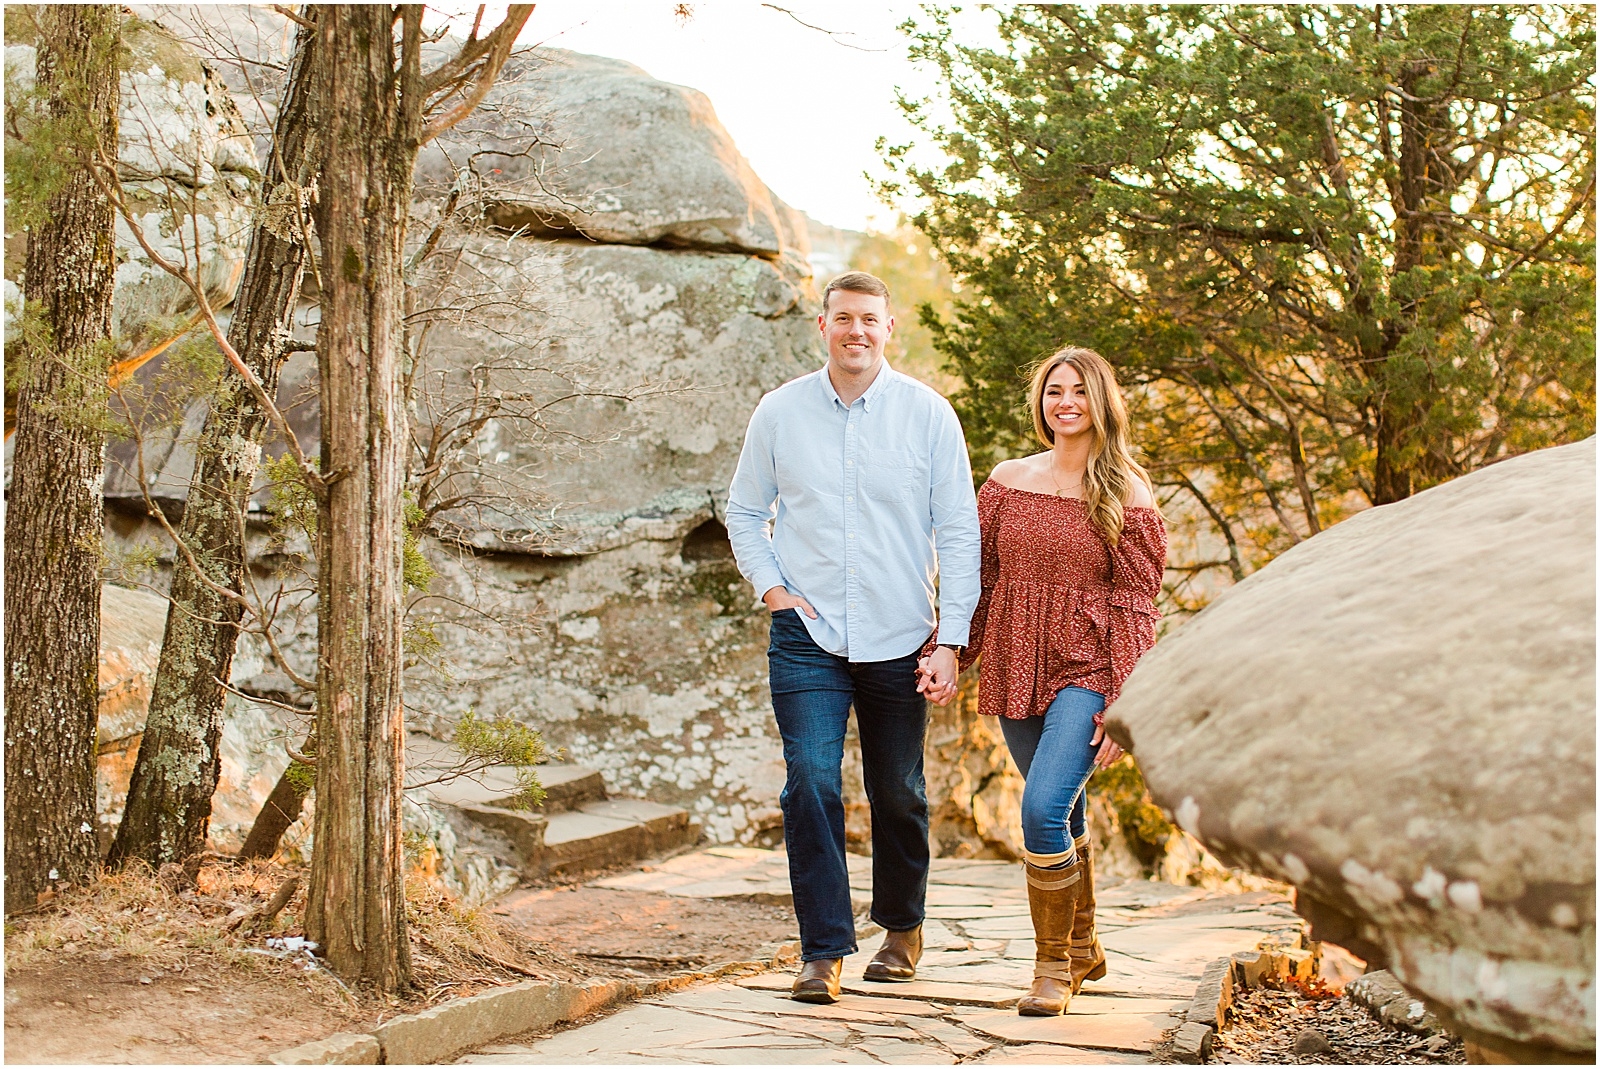 A Sunny Garden of the Gods Engagement Session | Shiloh and Lee | Bret and Brandie Photography078.jpg